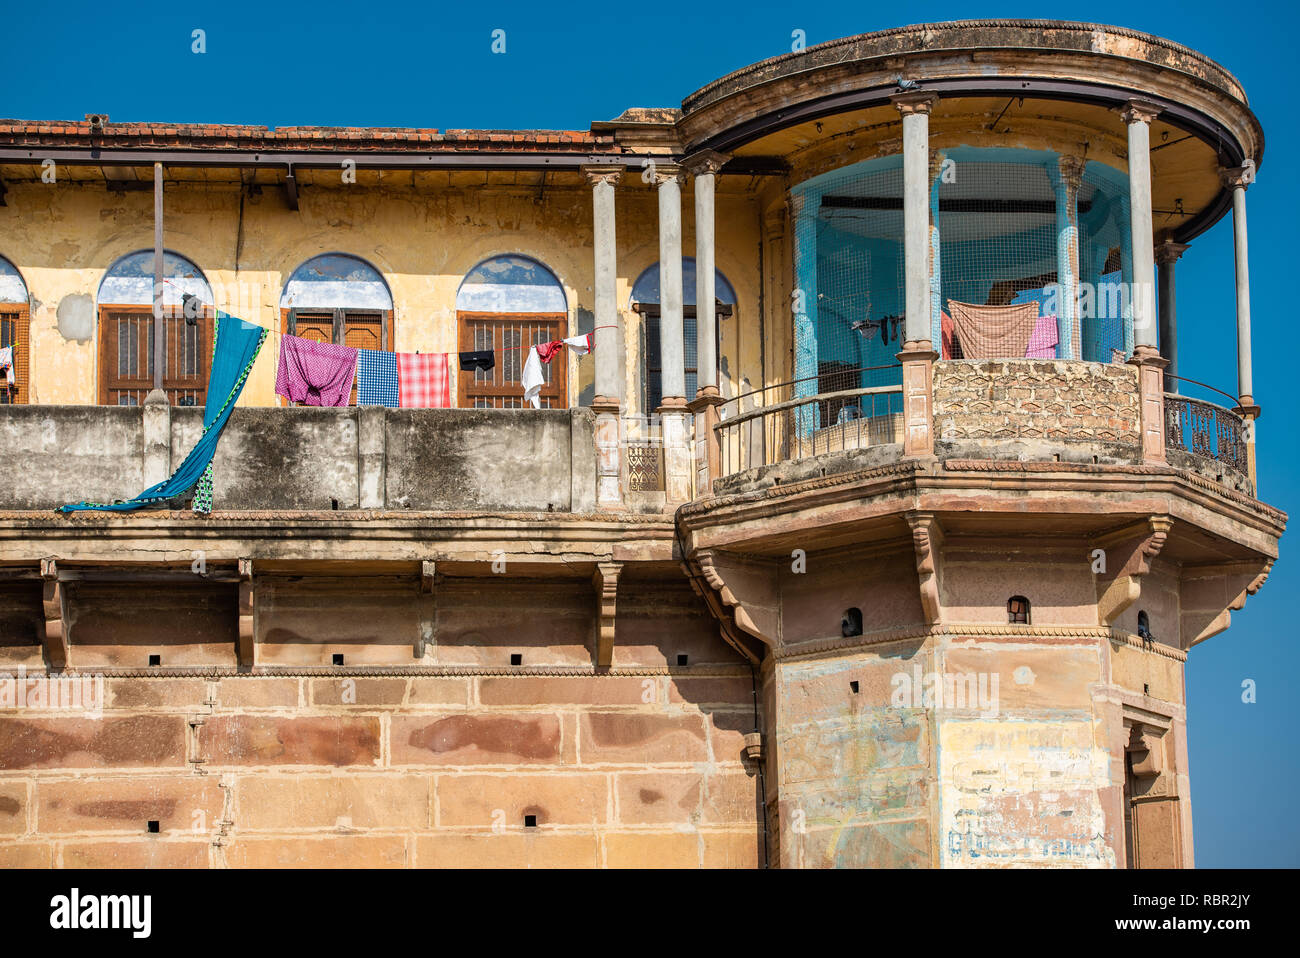 High level balcony detail of an old sandstone building in Varanasi facing the Ganges, India take on a sunny day Stock Photo